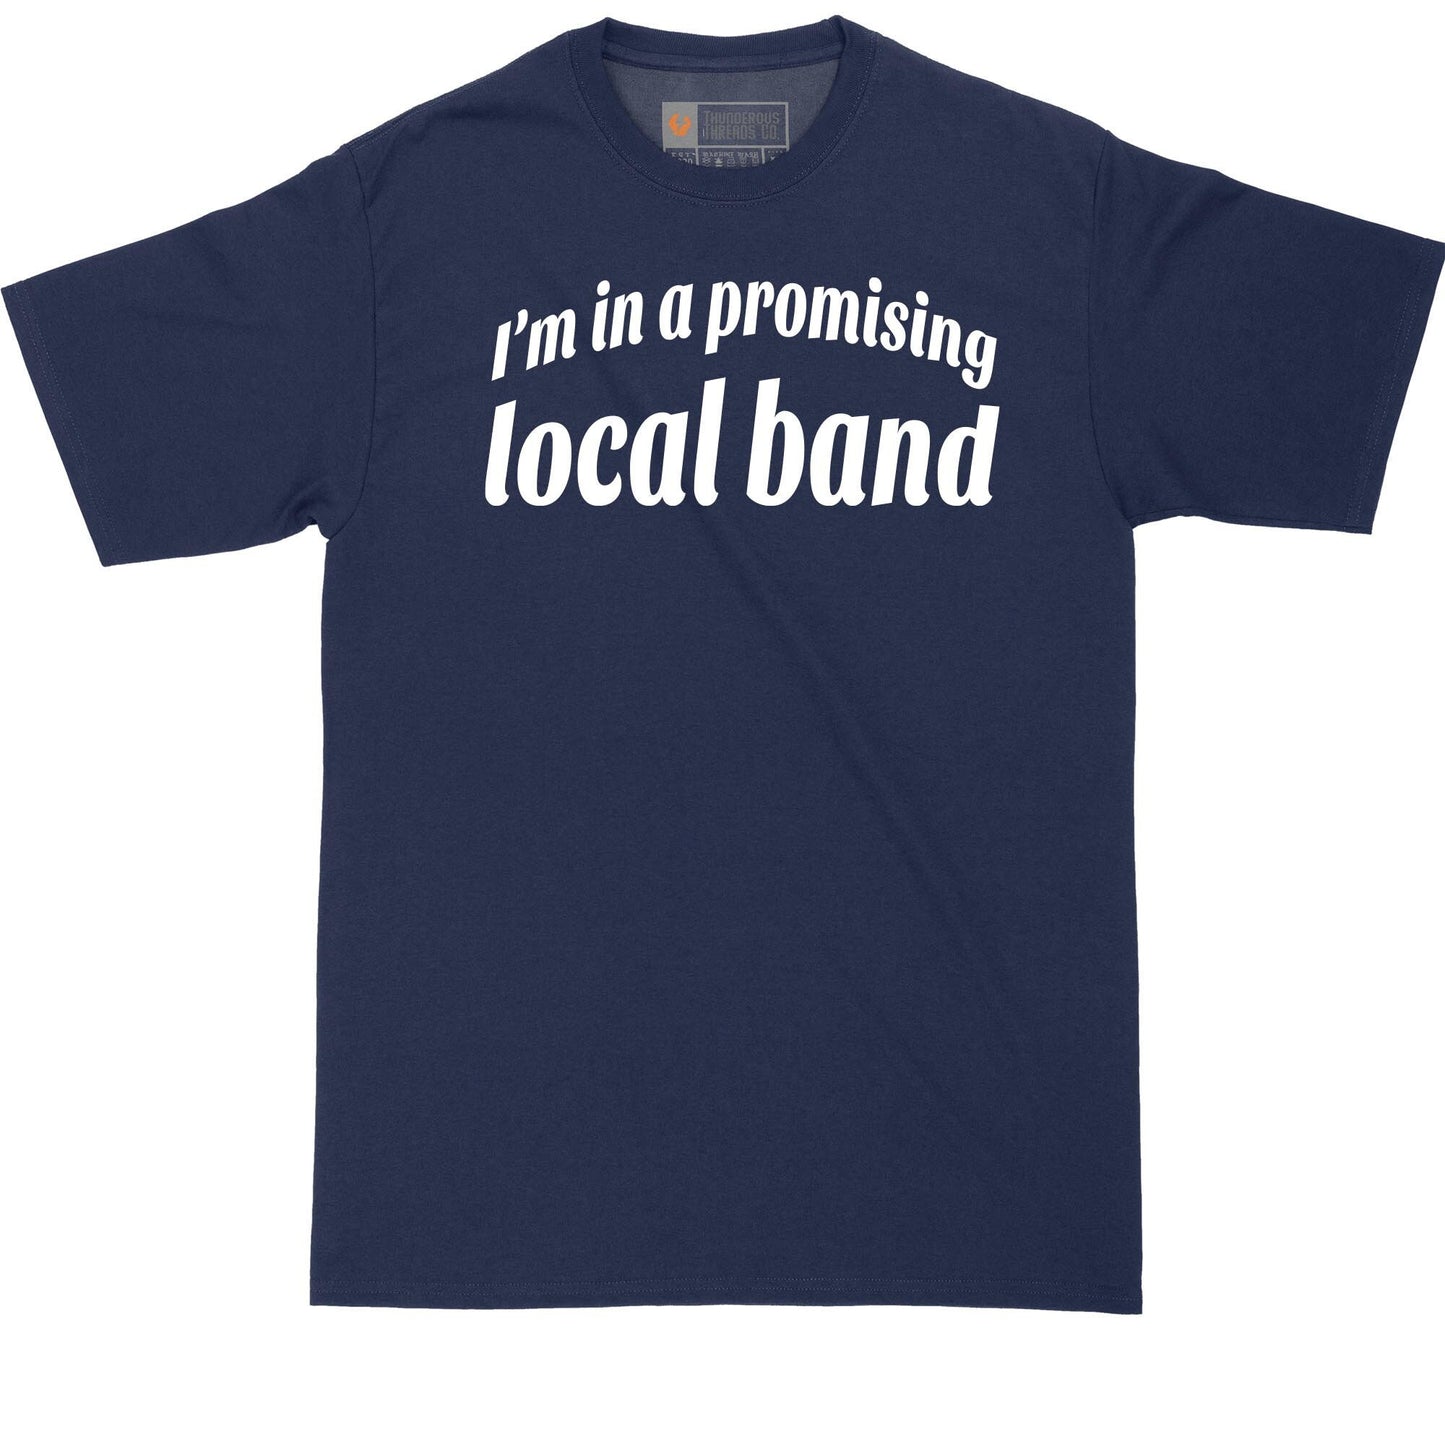 I'm In a Promising Local Band | Big and Tall Mens T-Shirt | Funny T-Shirt | Graphic T-Shirt